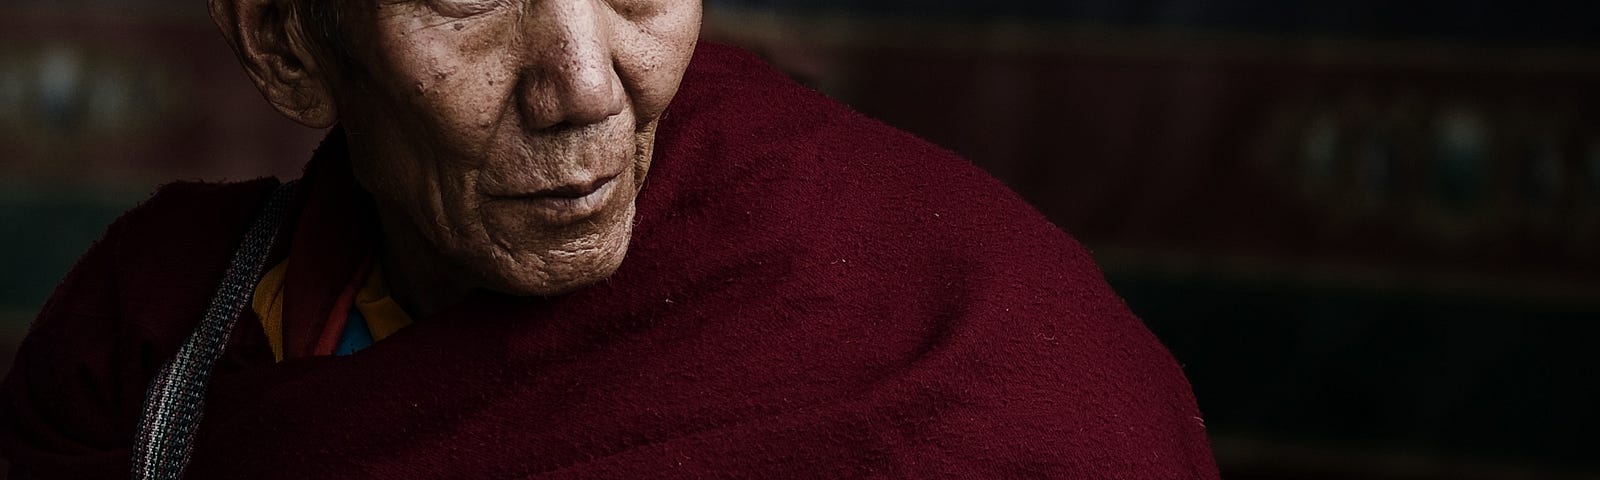 Old Tibetan monk, serene out look. Suffering is attachment.